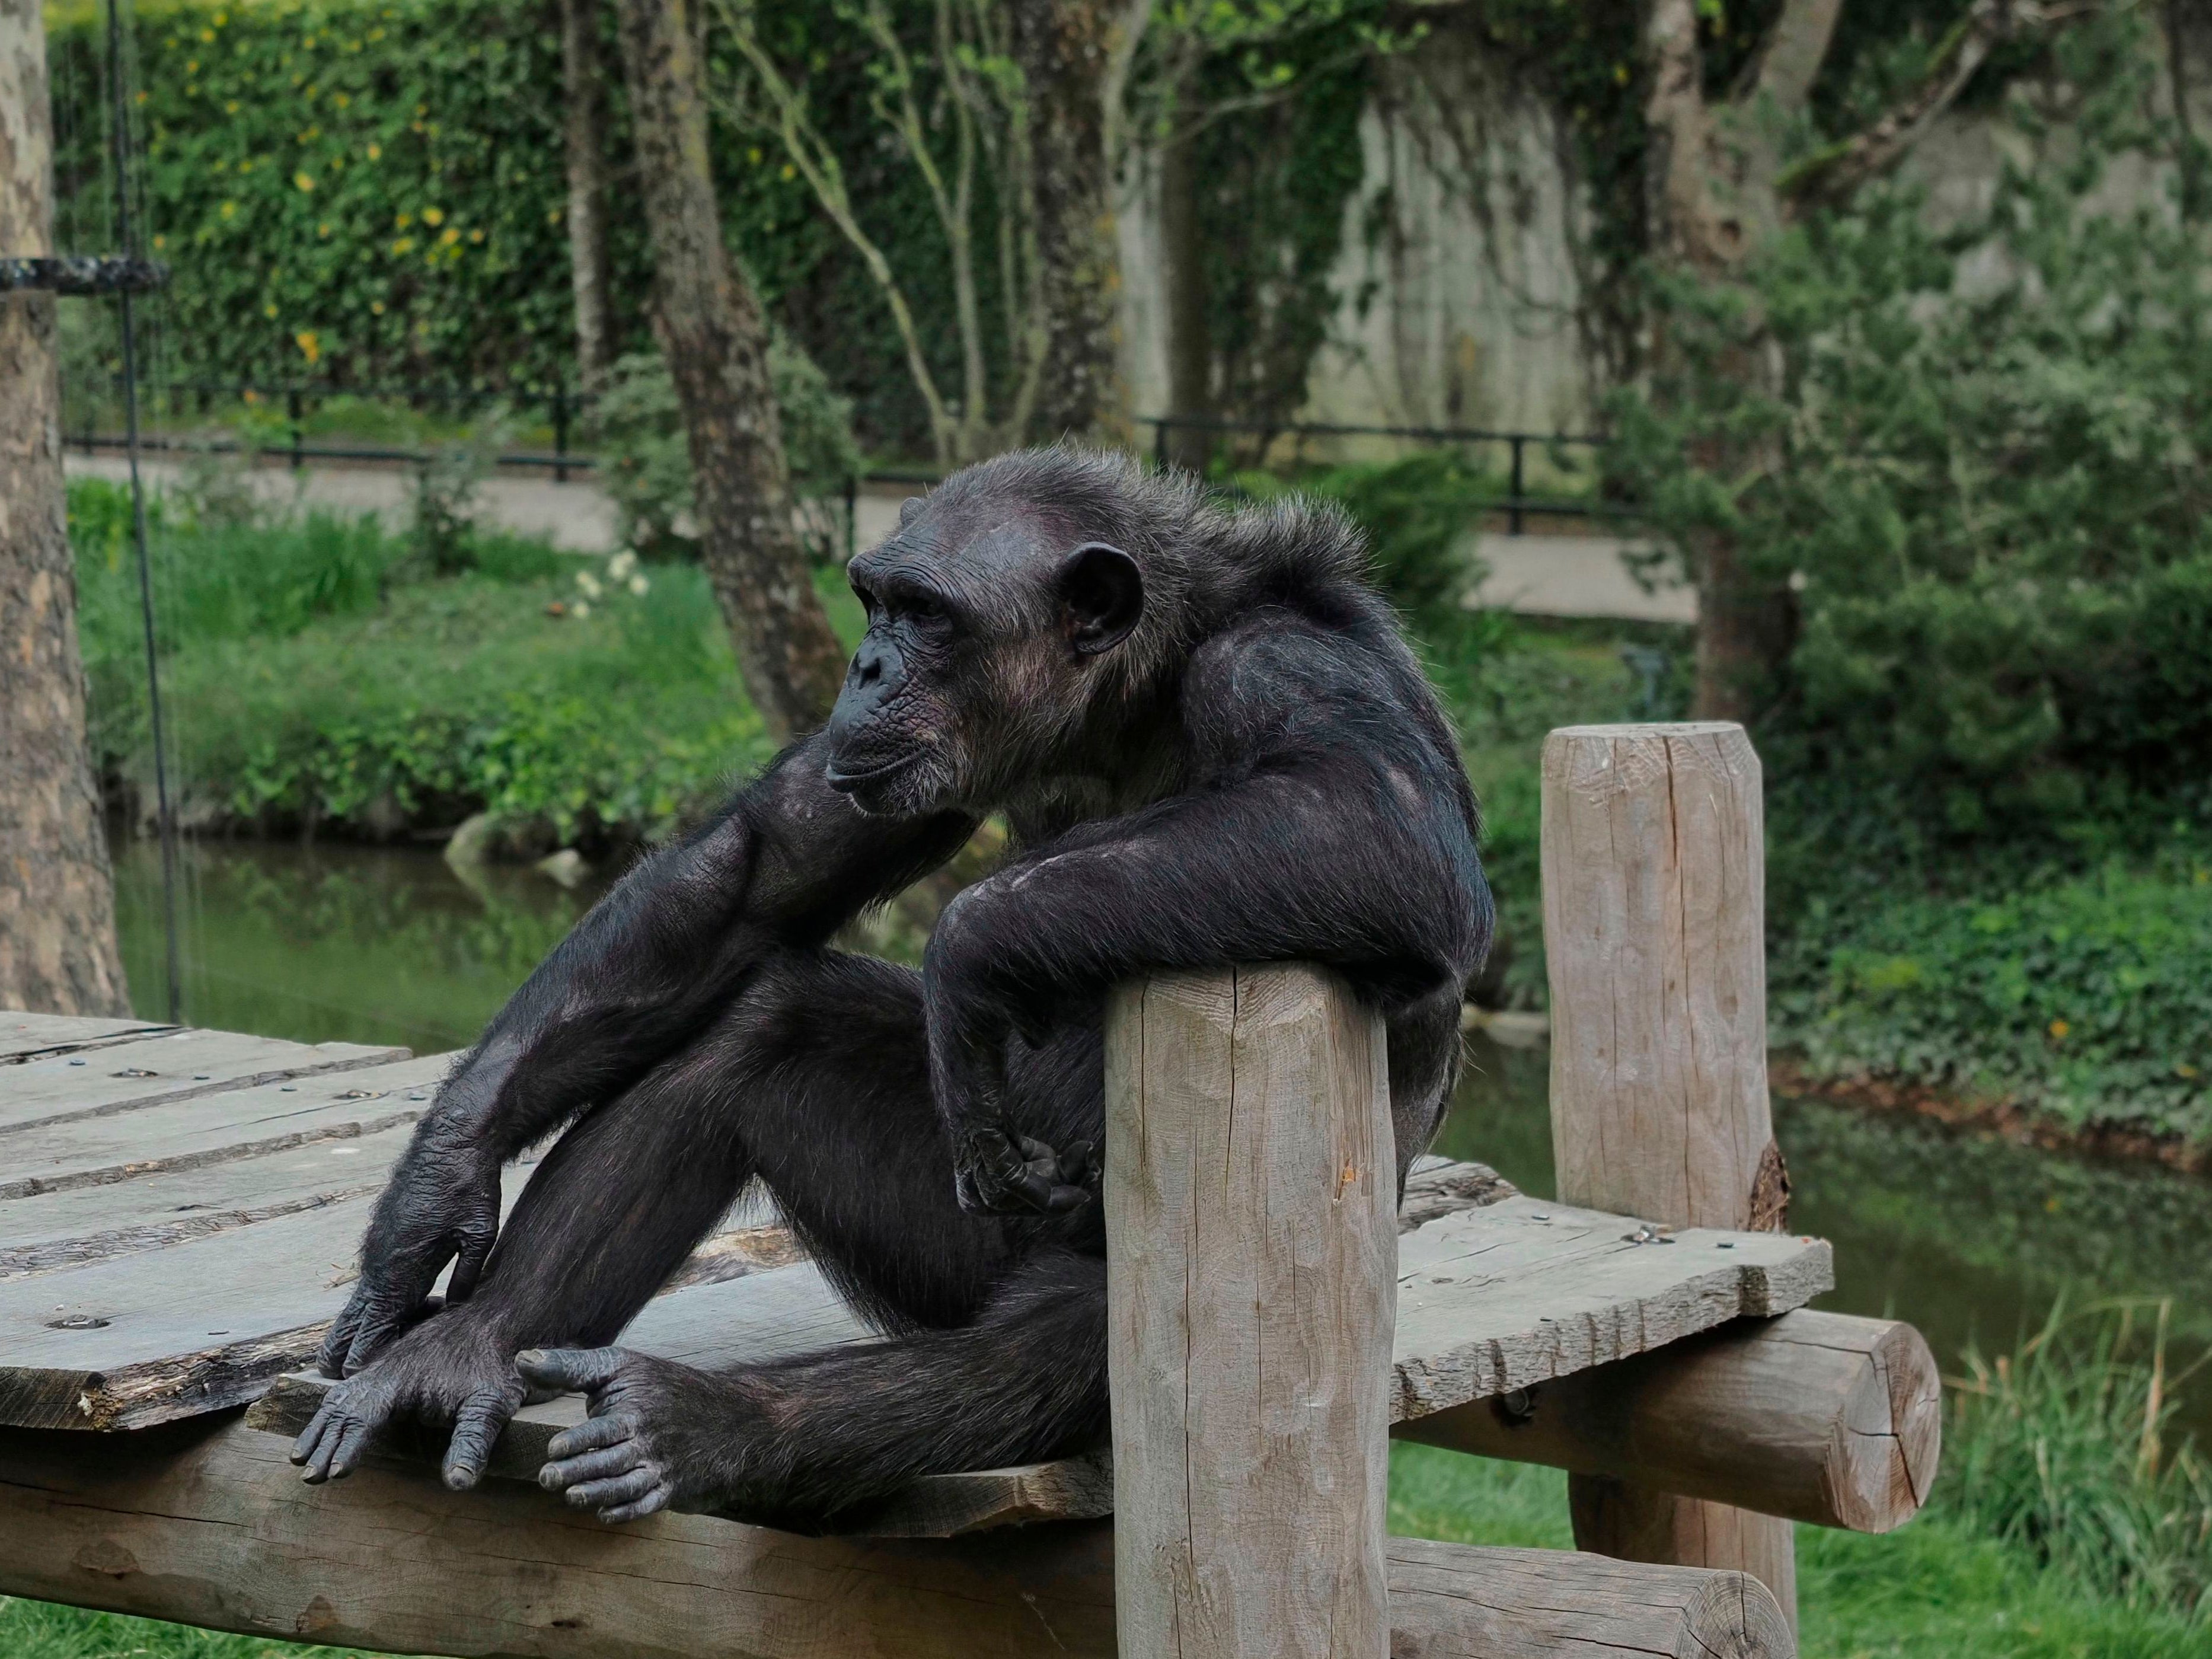 A chimpanzee sits in its enclosure at the empty zoological park of Beauval in Saint-Aignan-sur-Cher, on 16 April 2020